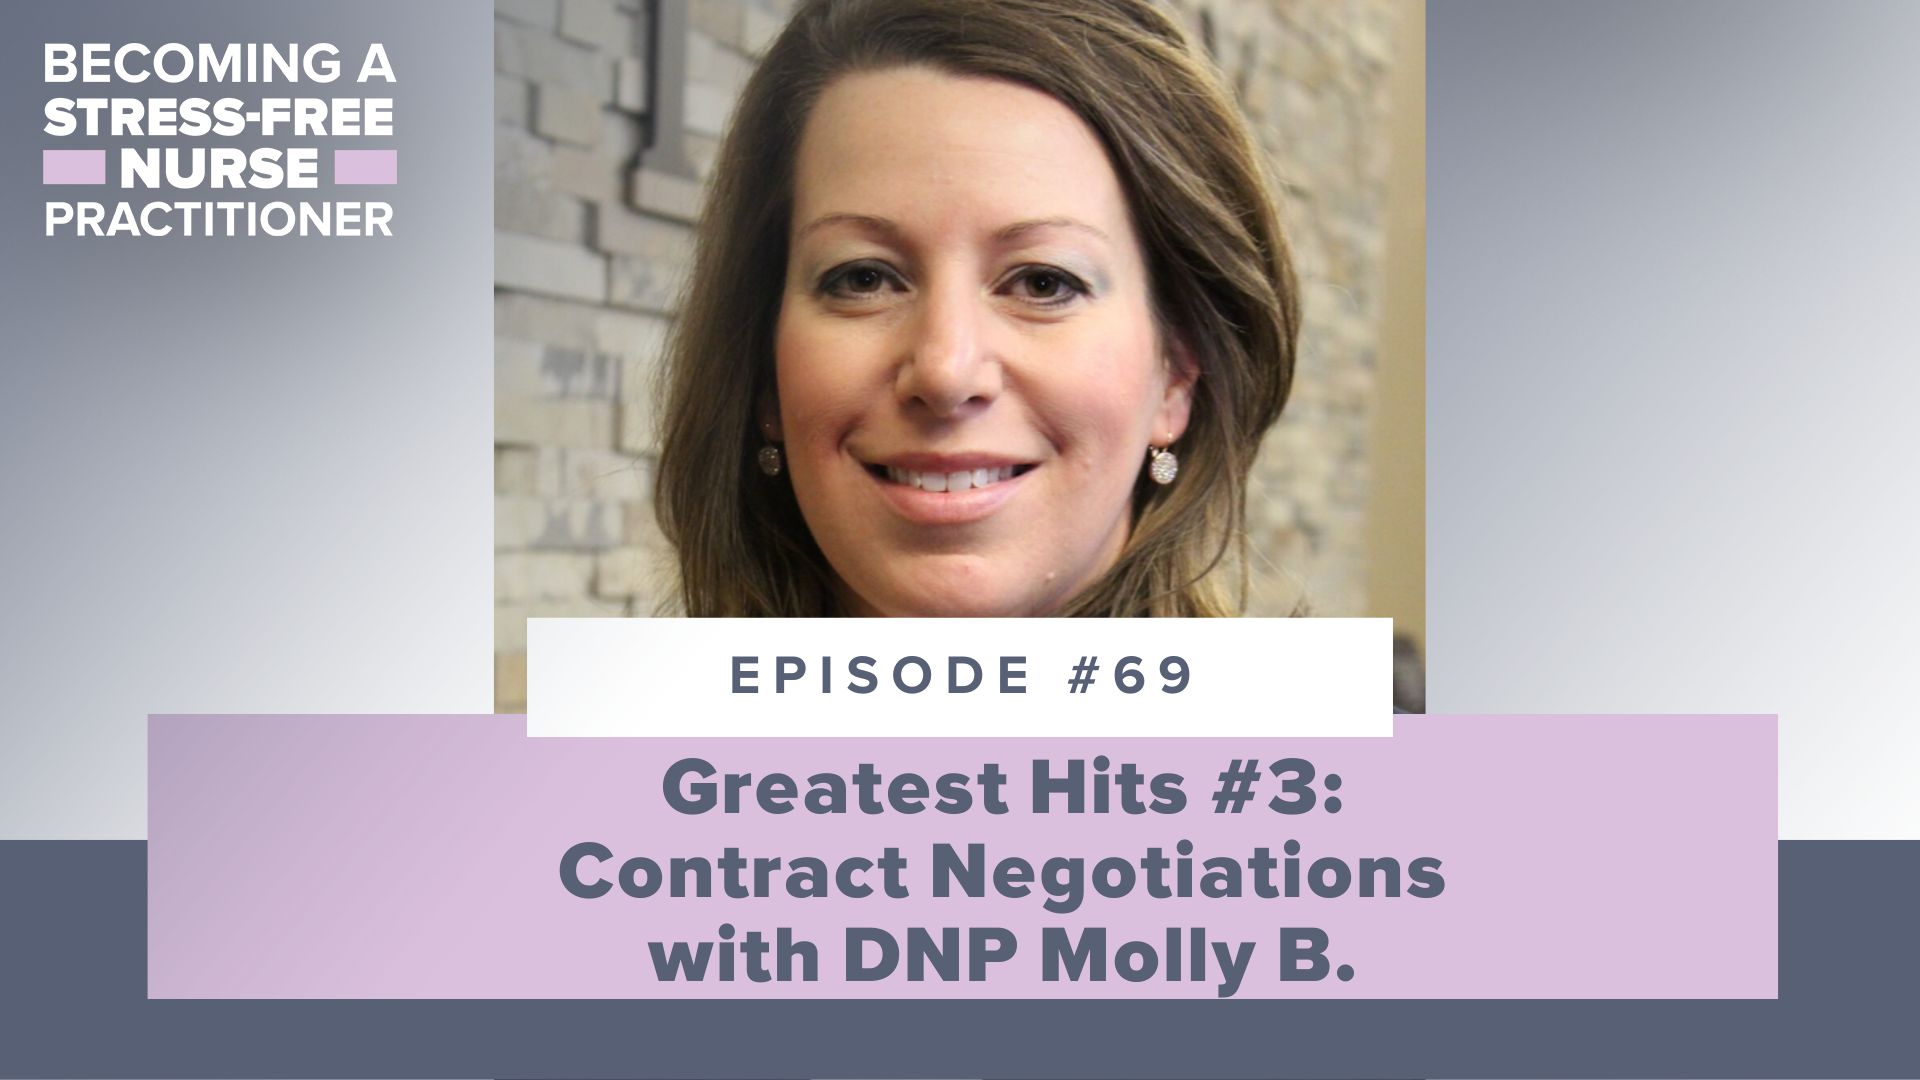 SMNP Blog - Ep #69: Greatest Hits #3: Contract Negotiations with DNP Molly B. [NEW NP]